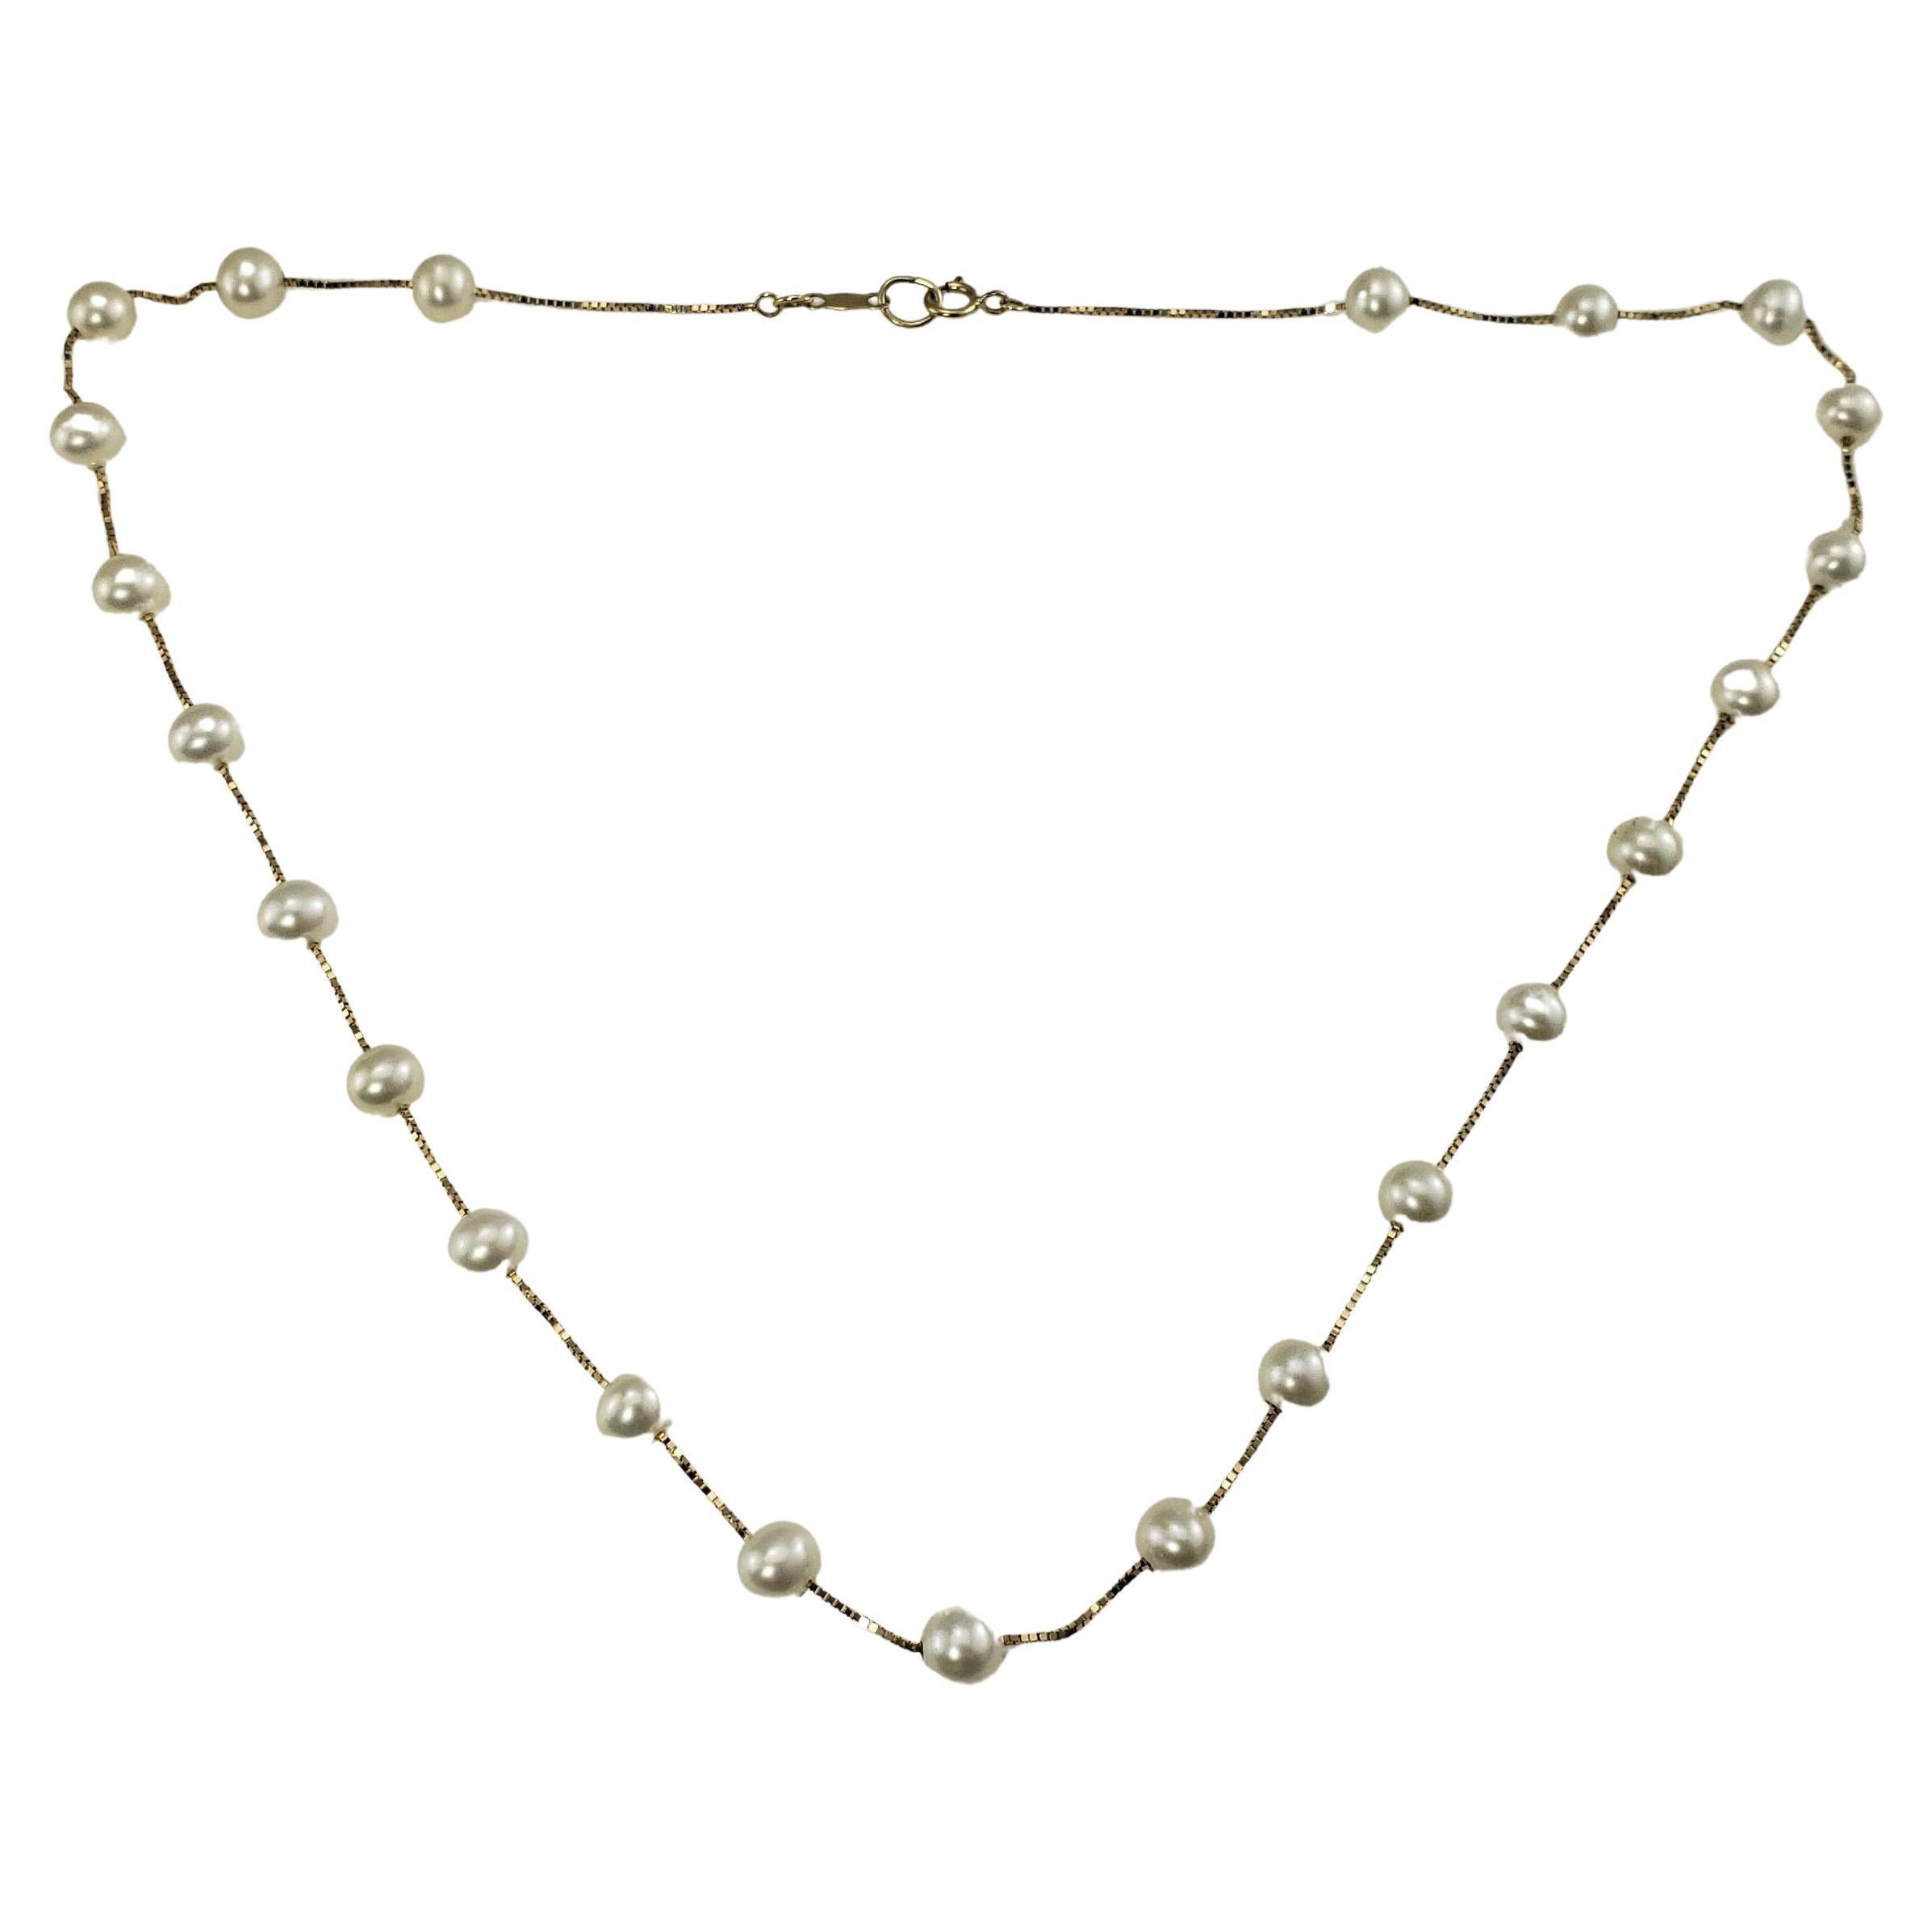 10 Karat Yellow Gold and Pearl Necklace